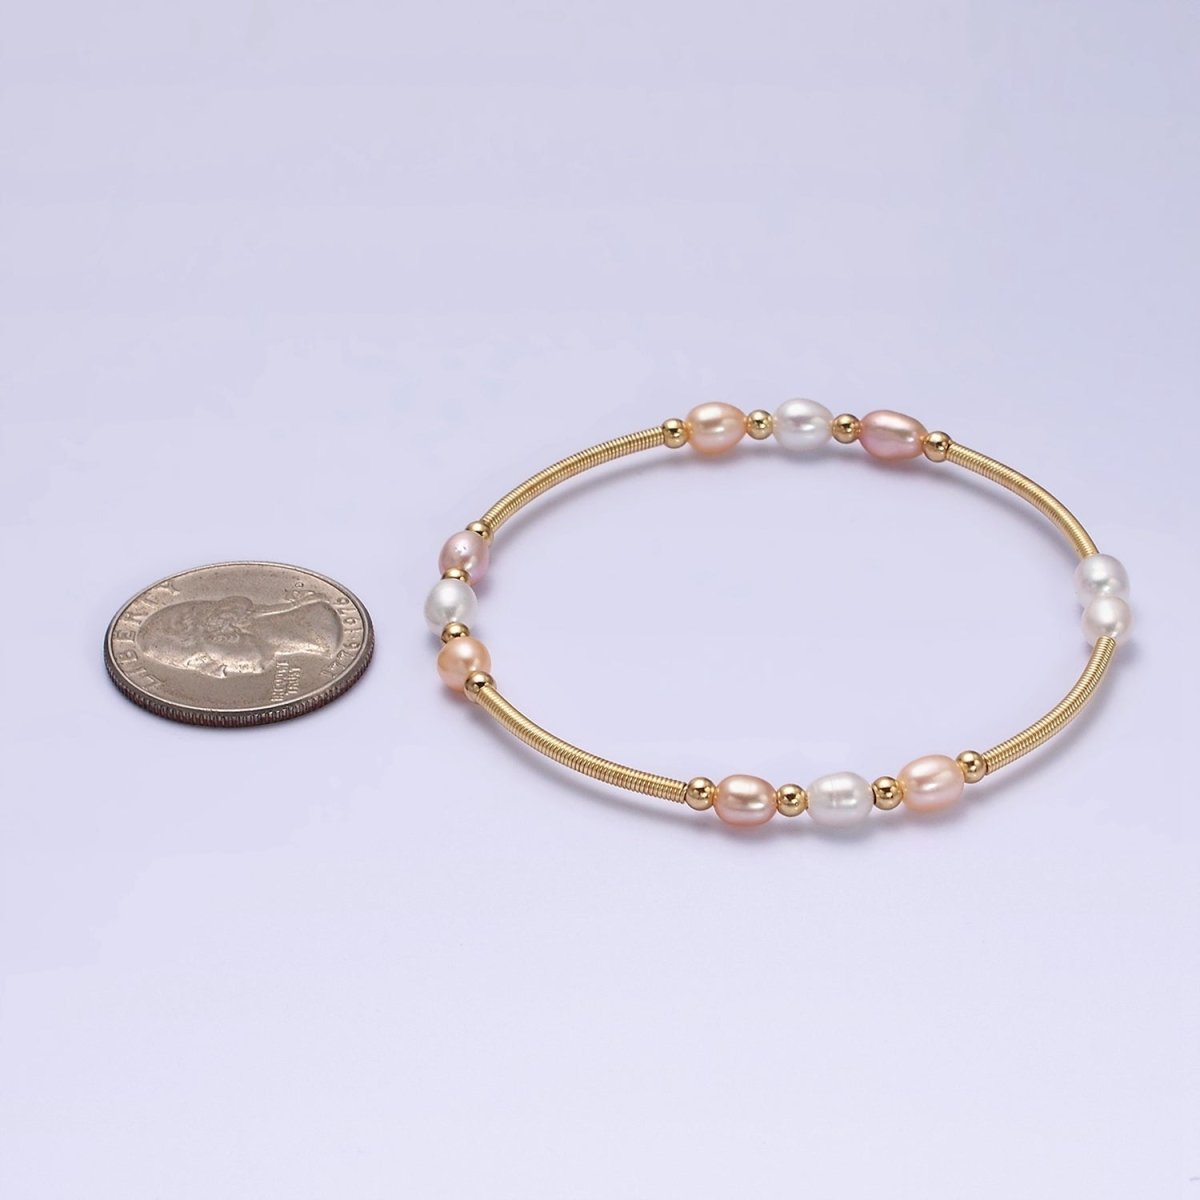 Petite Pearl Cuff Bracelet White or Pink Pearls Gold Filled Cuff bracelet Textured Bracelet | WA-1864 WA-1865 Clearance Pricing - DLUXCA